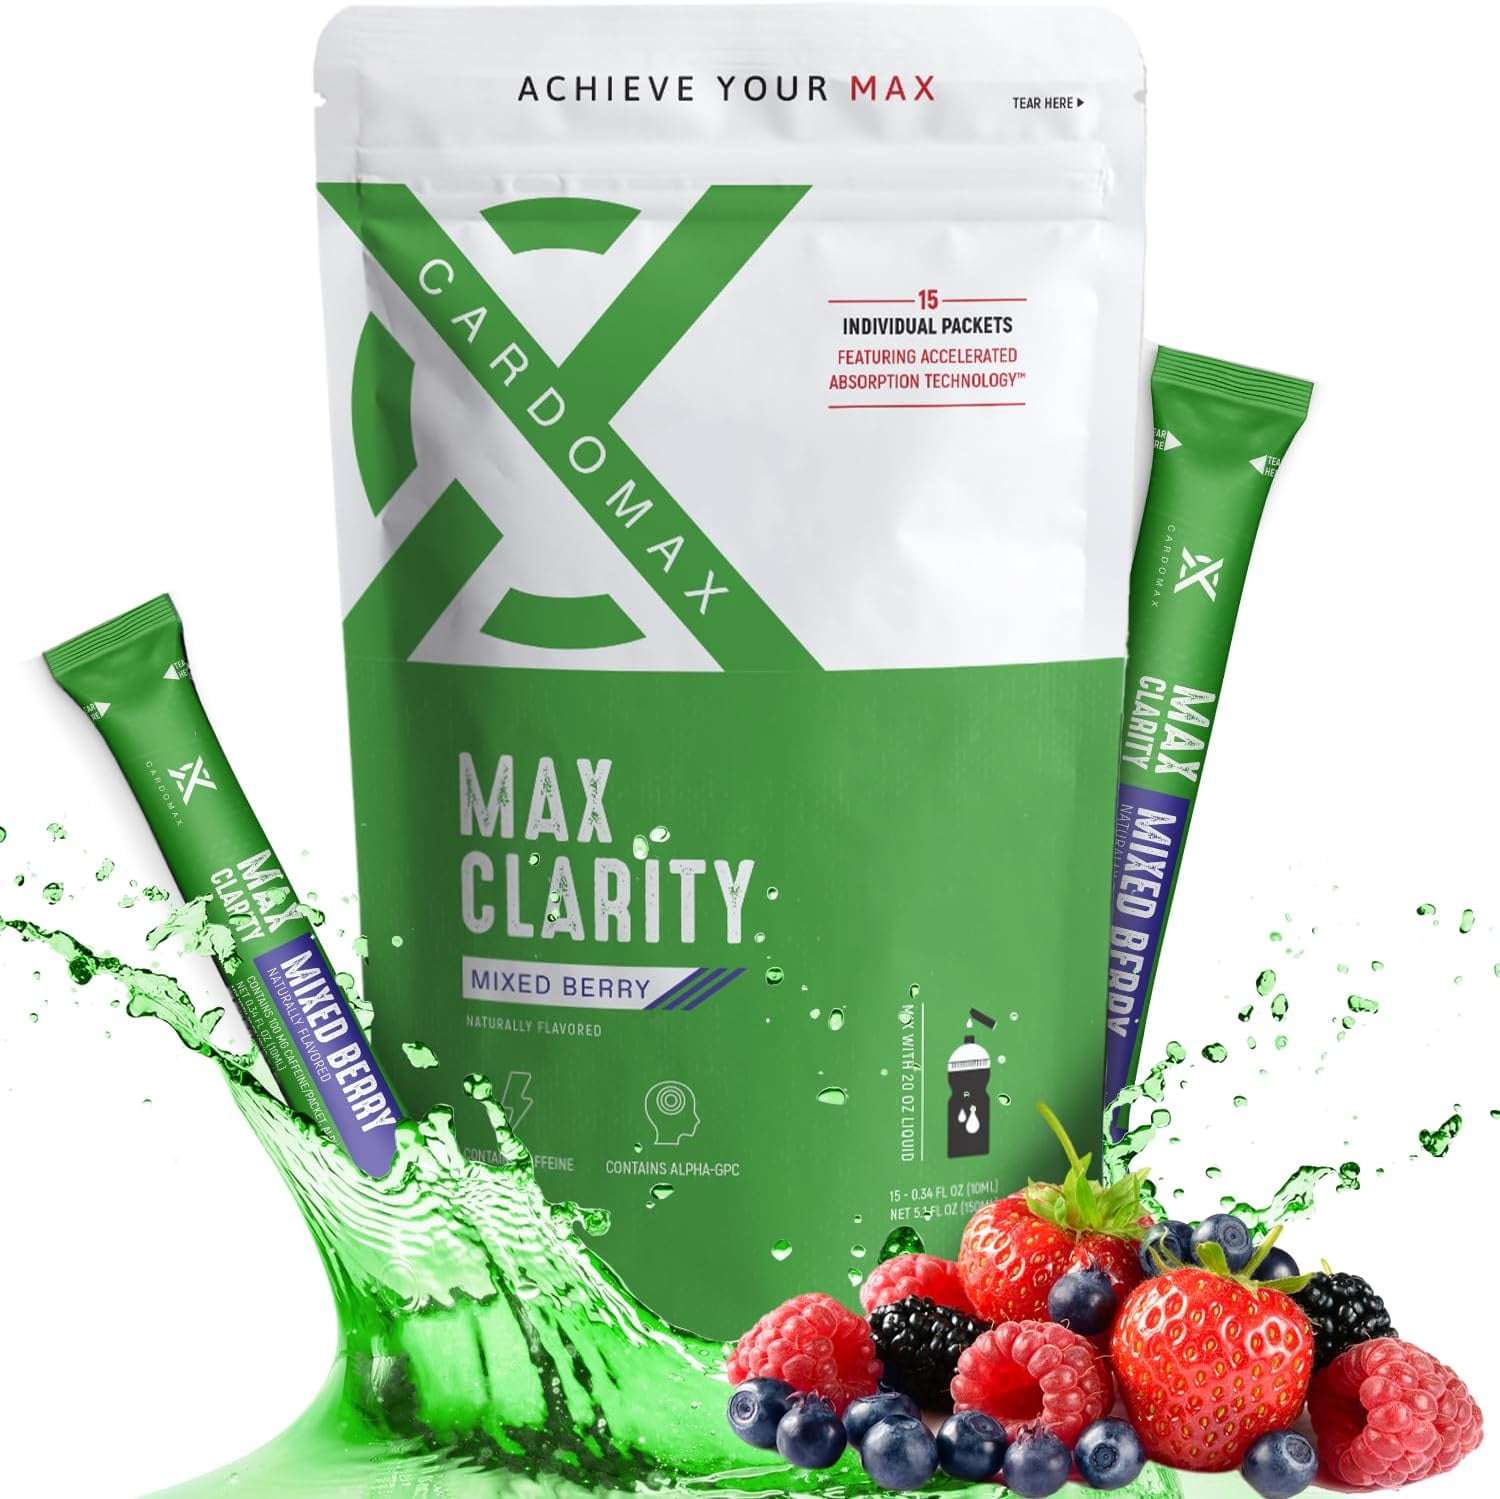 THE MAX Challenge – Protein and Supplement Shop – THE MAX Challenge -  Protein and Supplement Shop